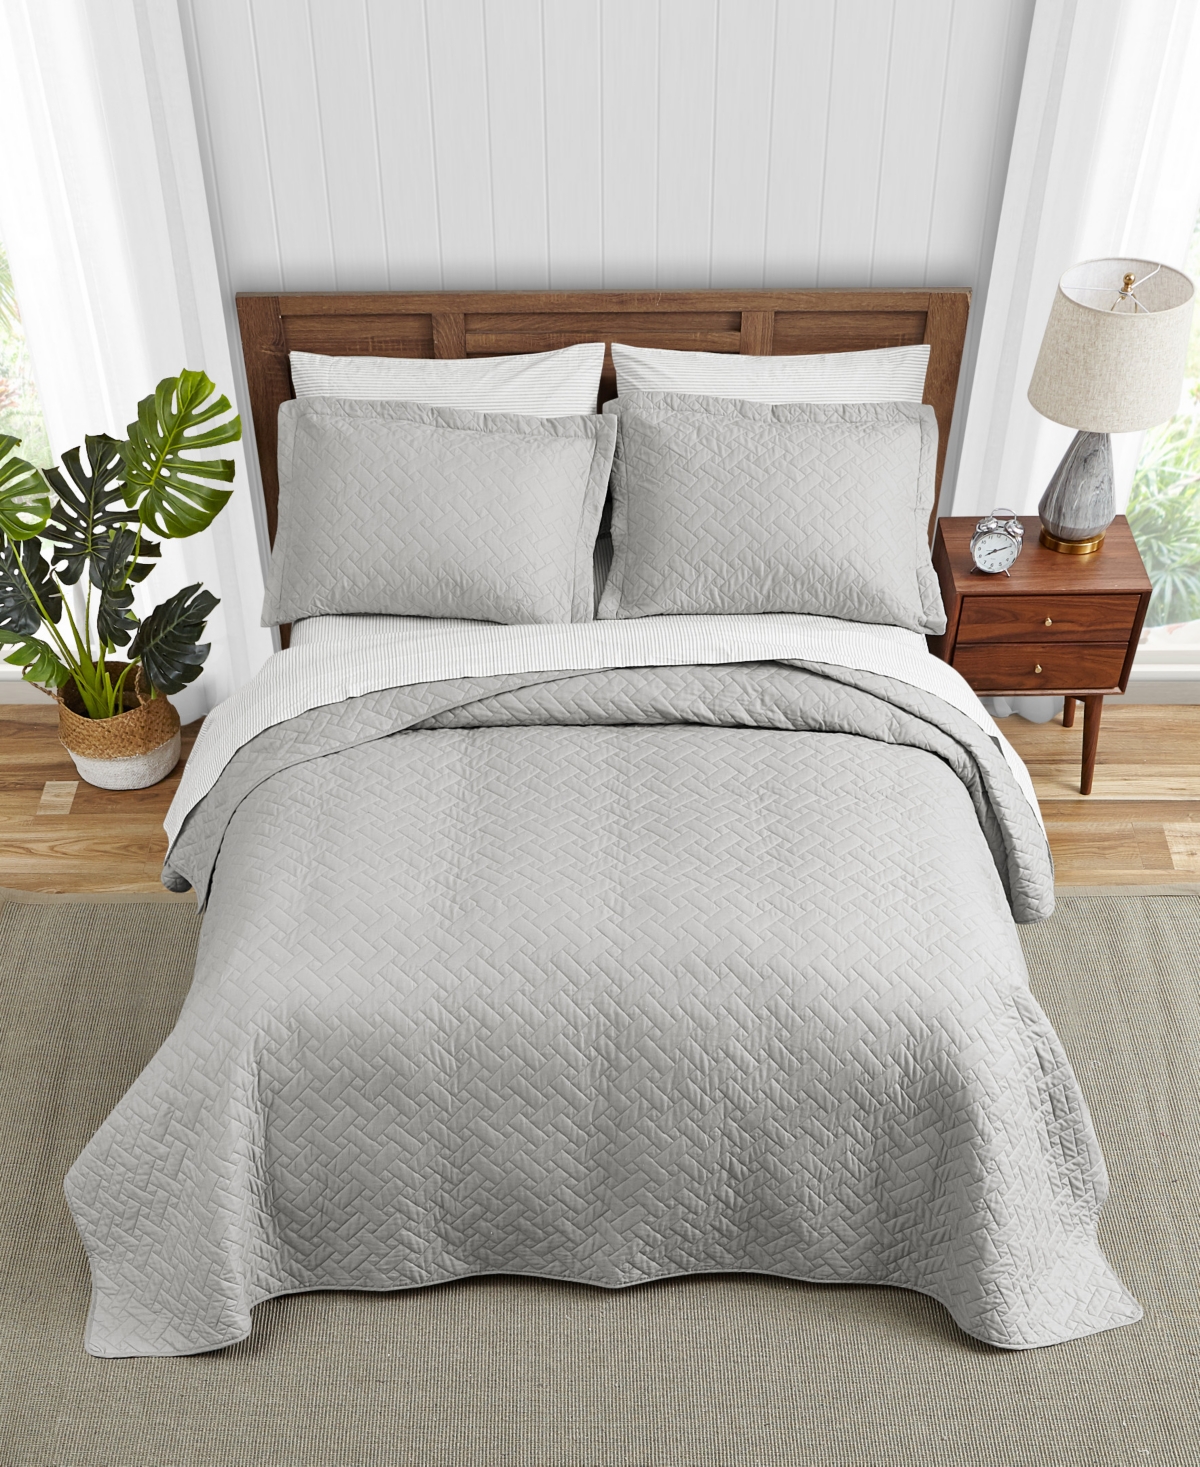 TOMMY BAHAMA HOME TOMMY BAHAMA RAFFIA SOLID COTTON REVERSIBLE 3 PIECE QUILT SET, FULL/QUEEN BEDDING